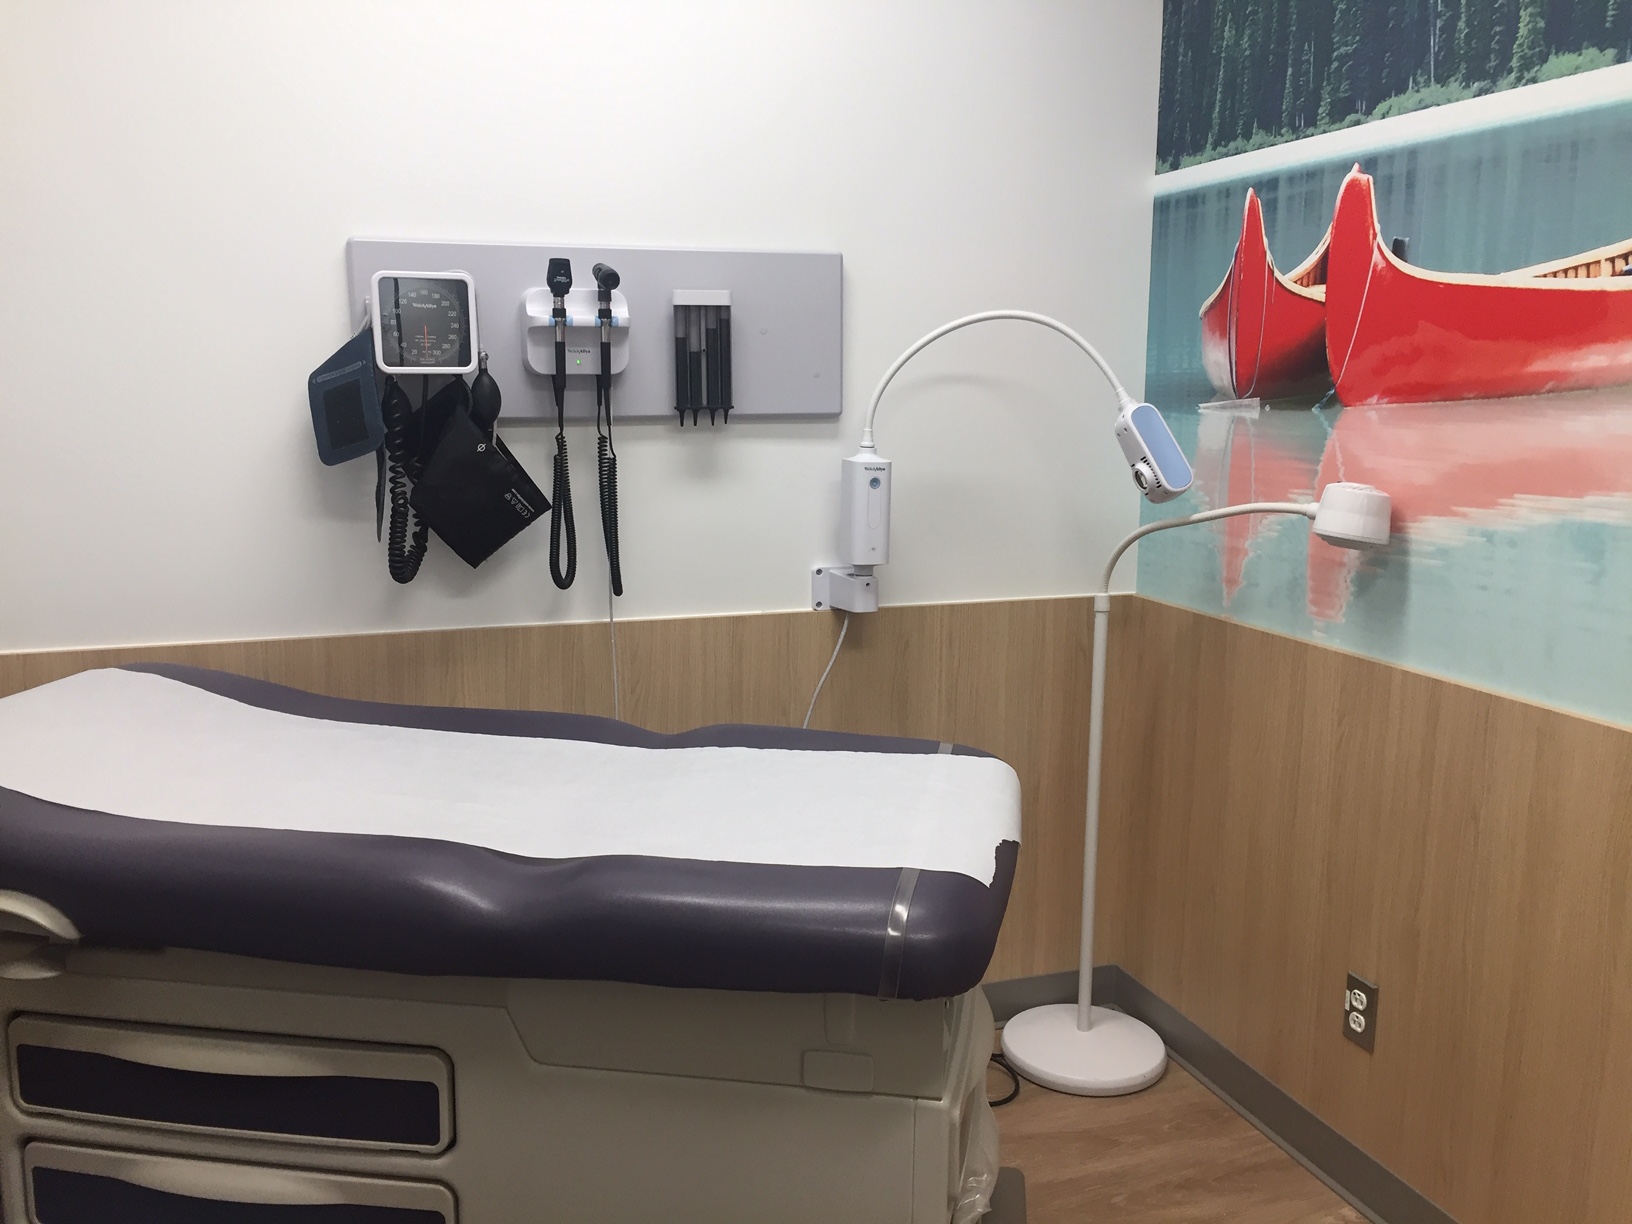 Exam room with wall mural